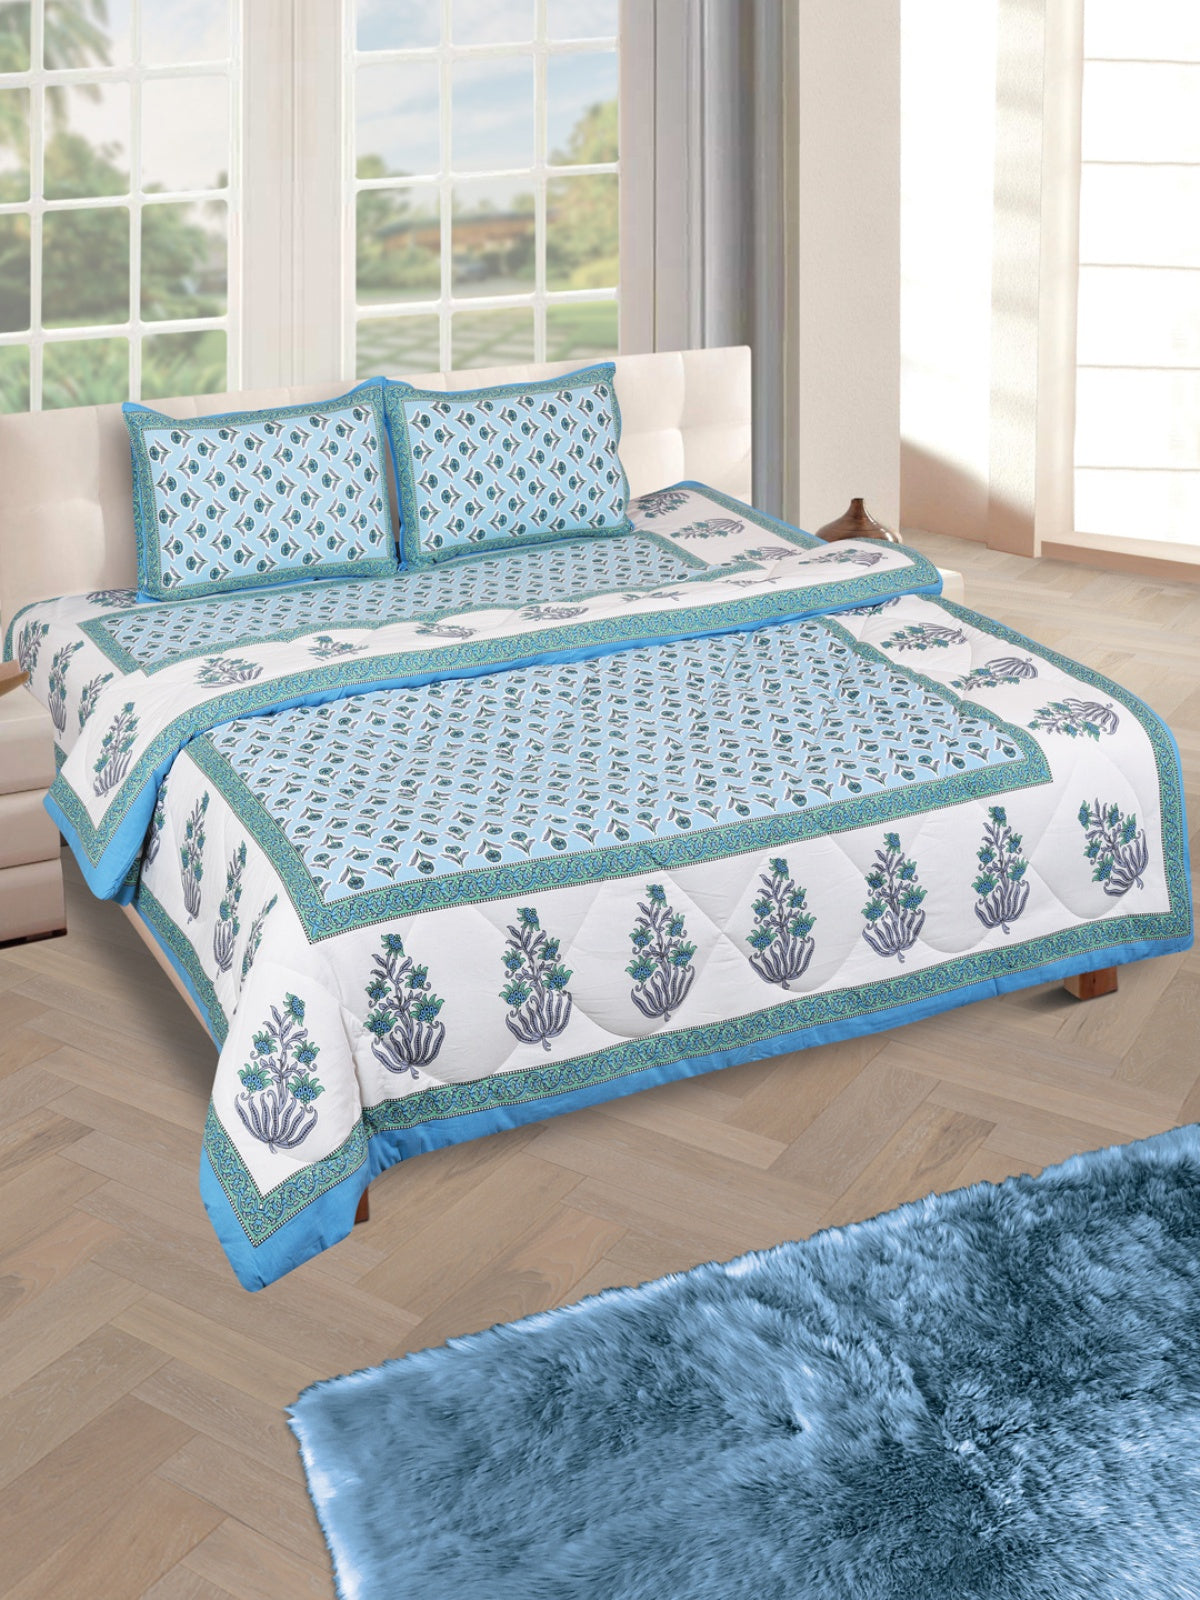 Jaipuri Bedding Set Reversible AC Comforter with Bedsheet and 2 Pillow Covers, Turquoise